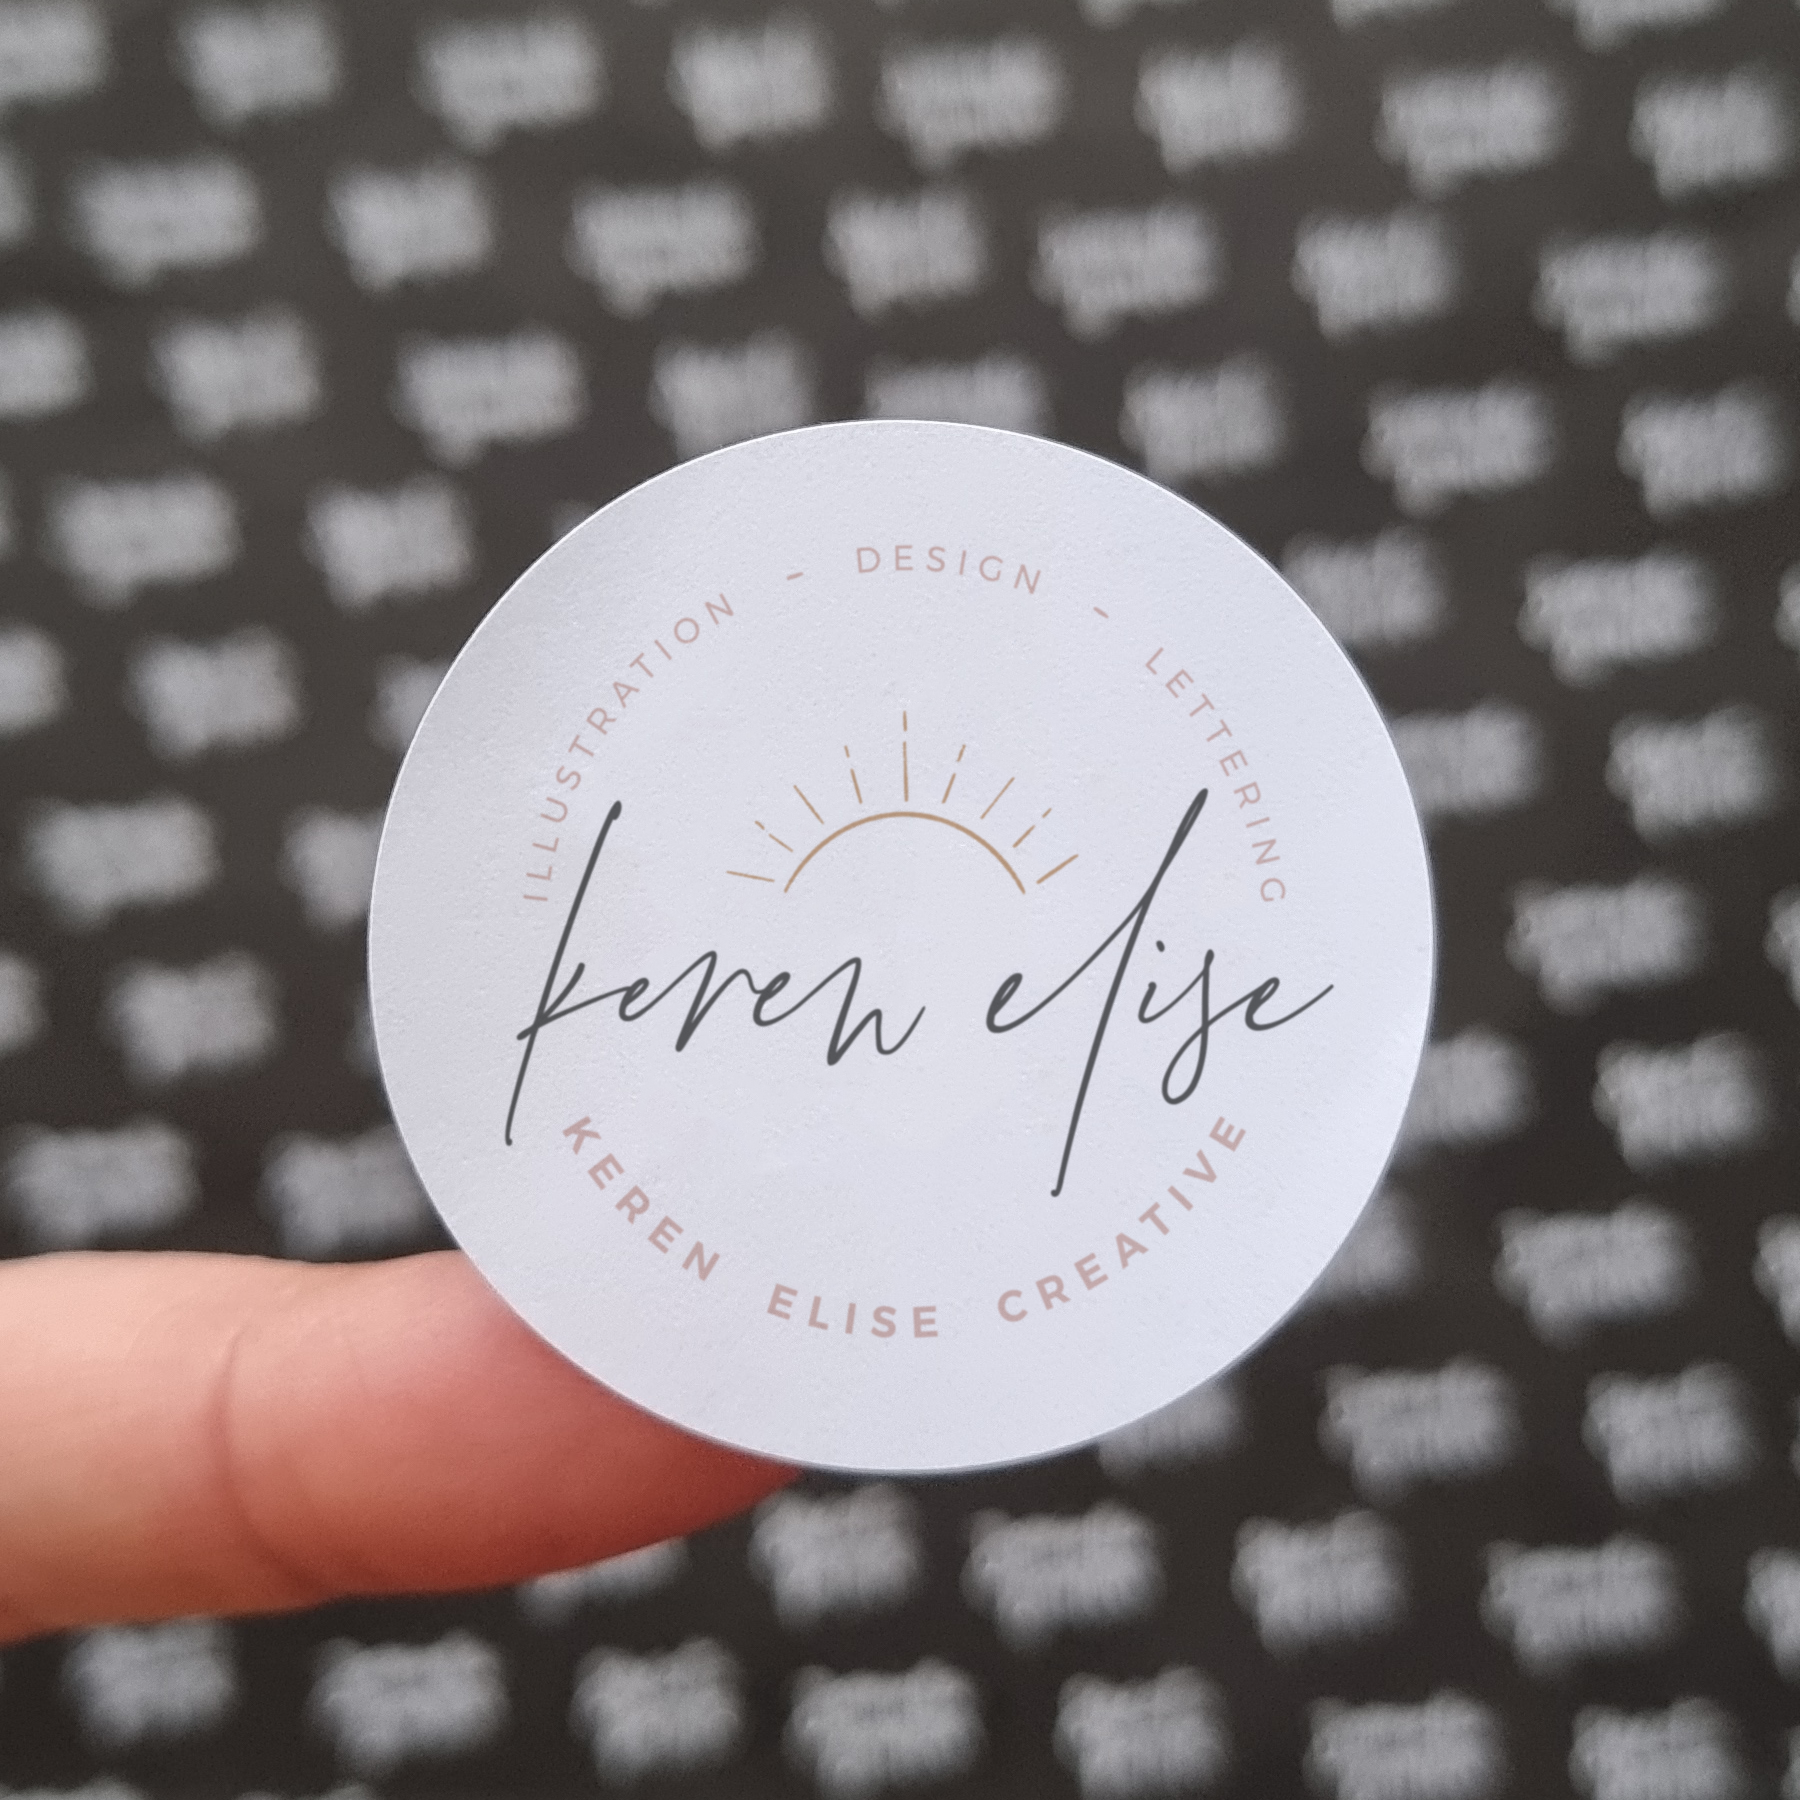 45mm Circle Stickers | Custom logo stickers for Keren Elise Creative by Sweet Petite